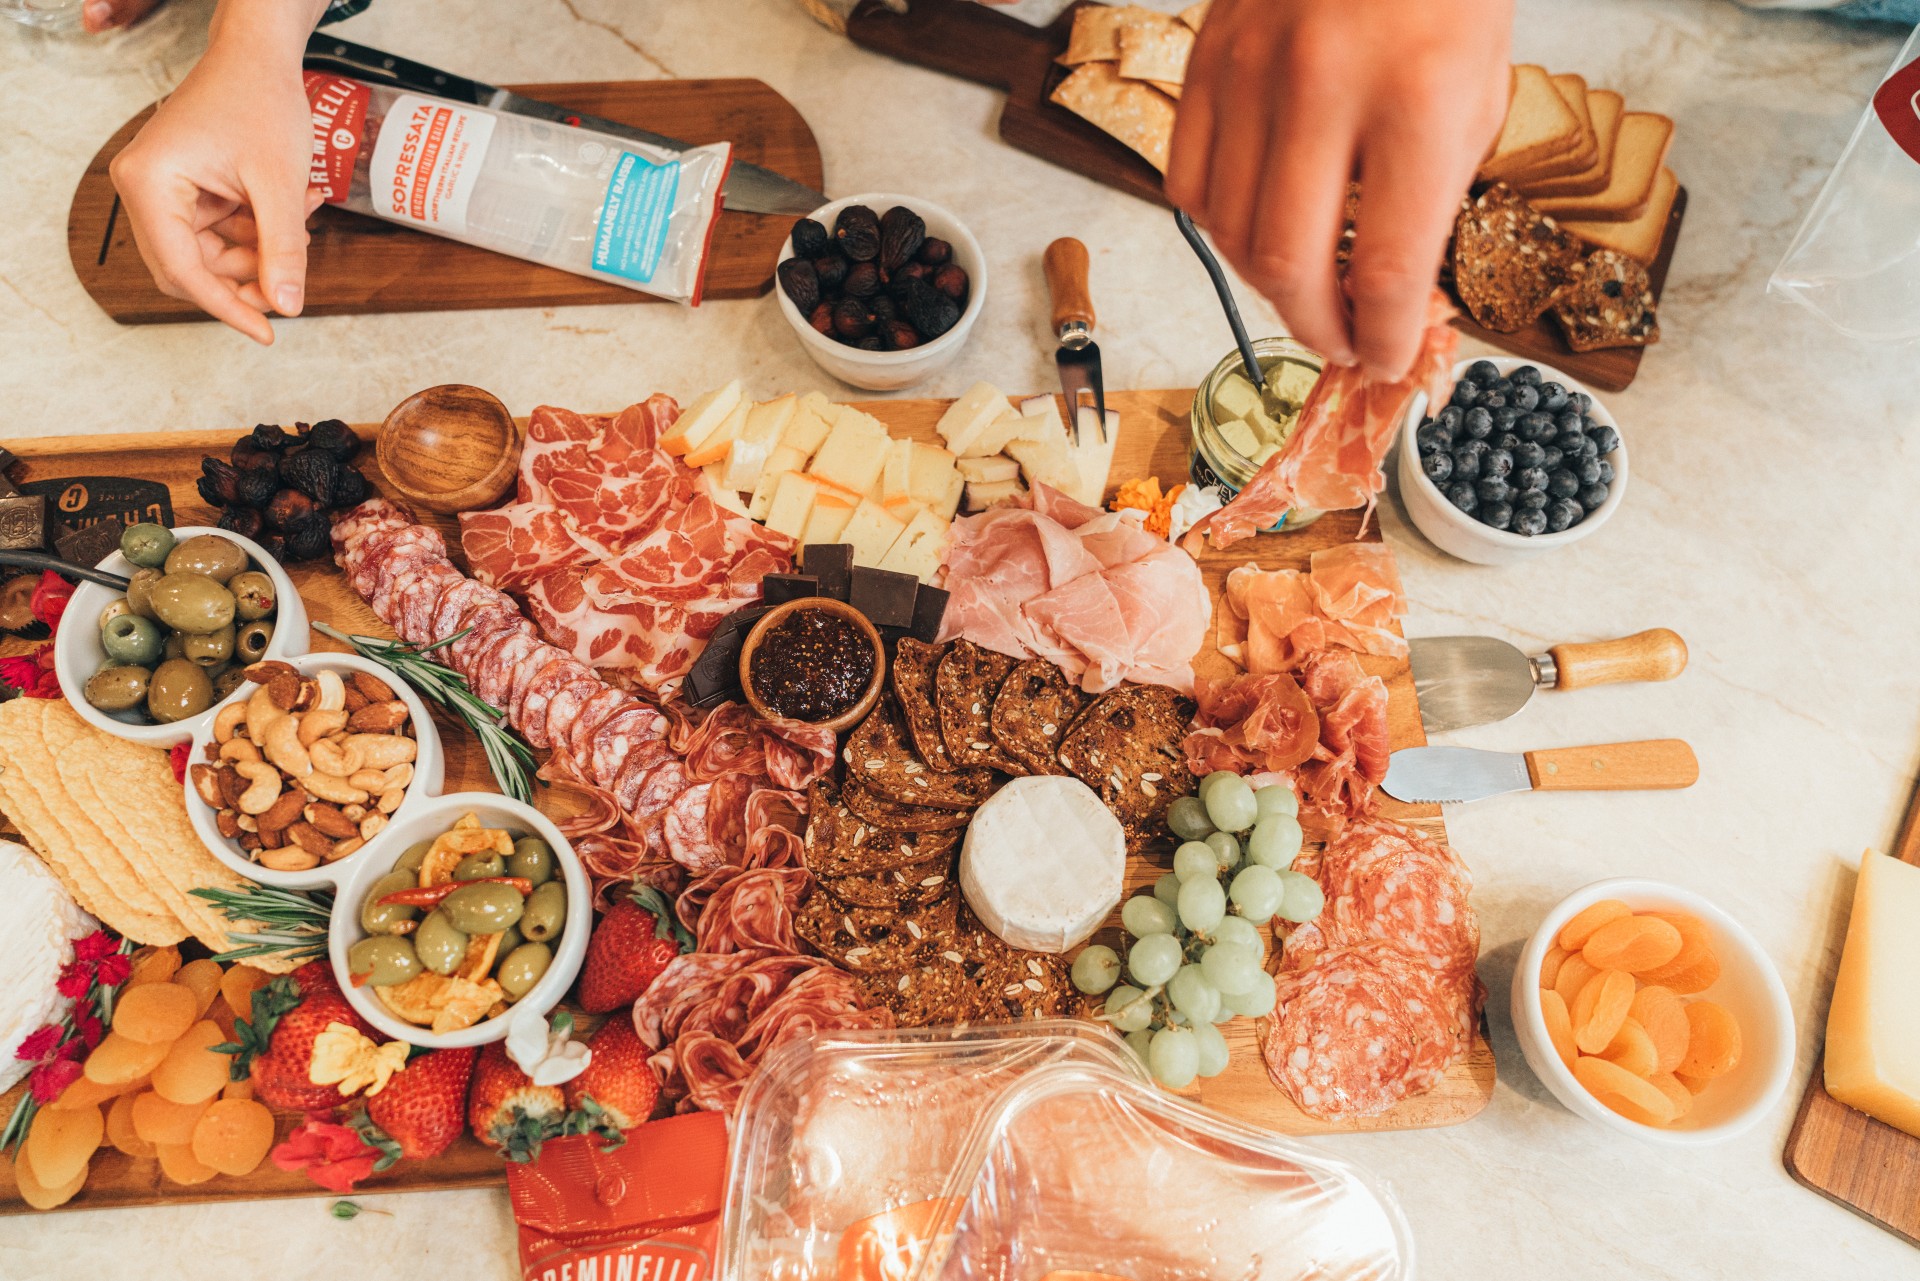 Italian Wines, Rye, and Bloody Marys: 4 Perfect Charcuterie Pairings According to Creminelli